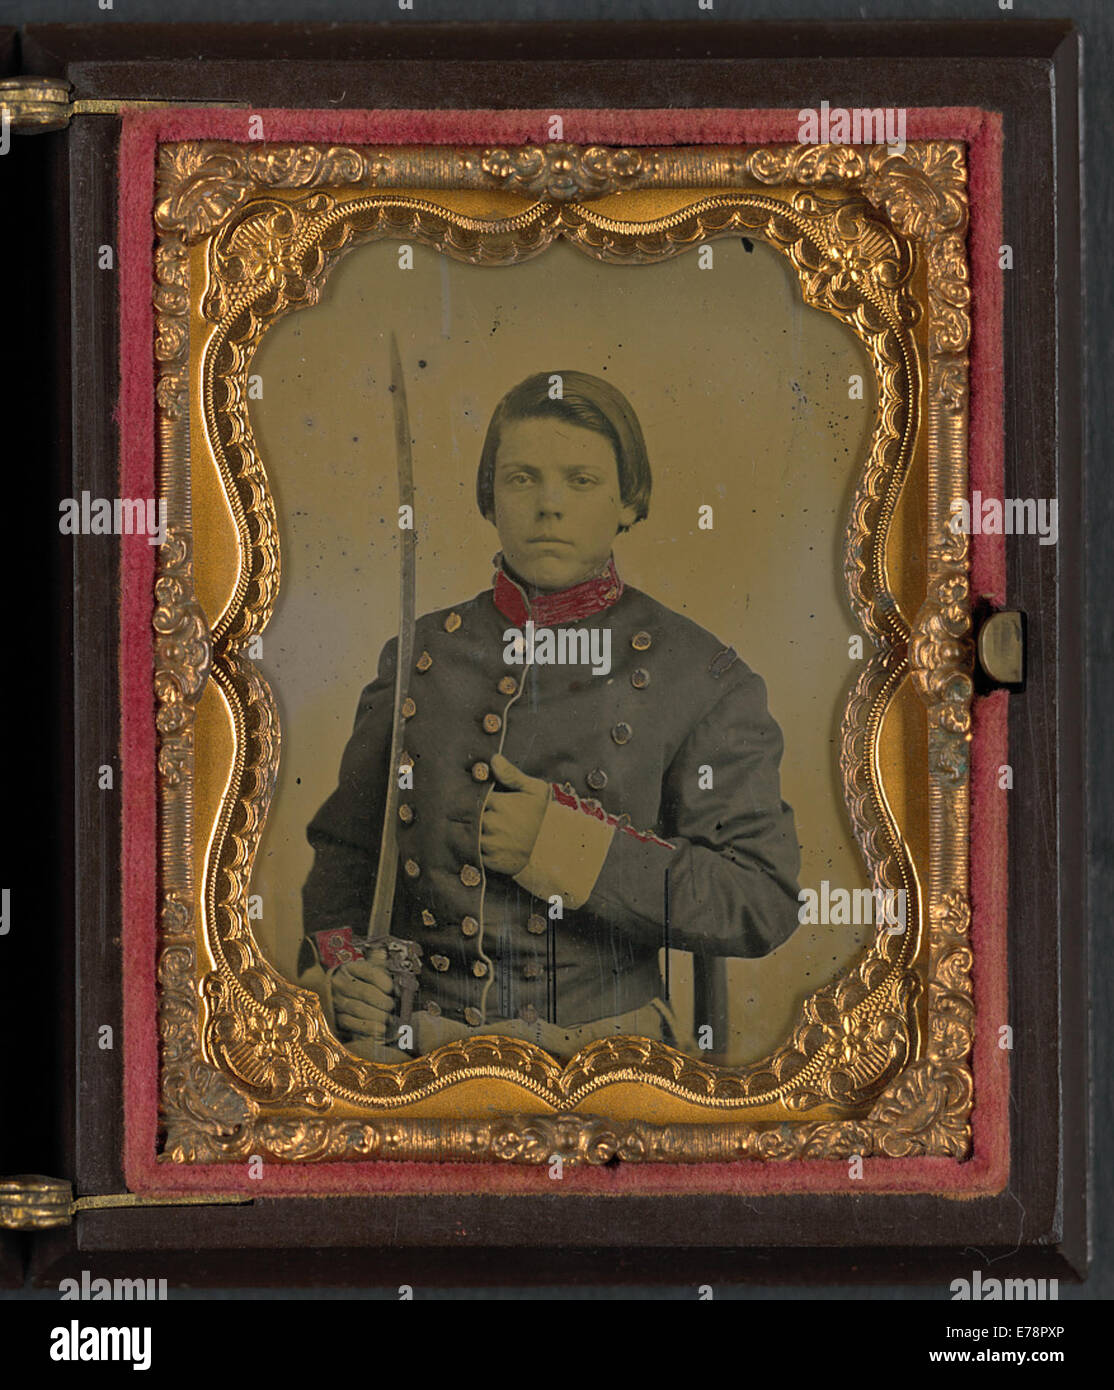 [Unidentified young soldier in Confederate uniform with saber] Stock Photo